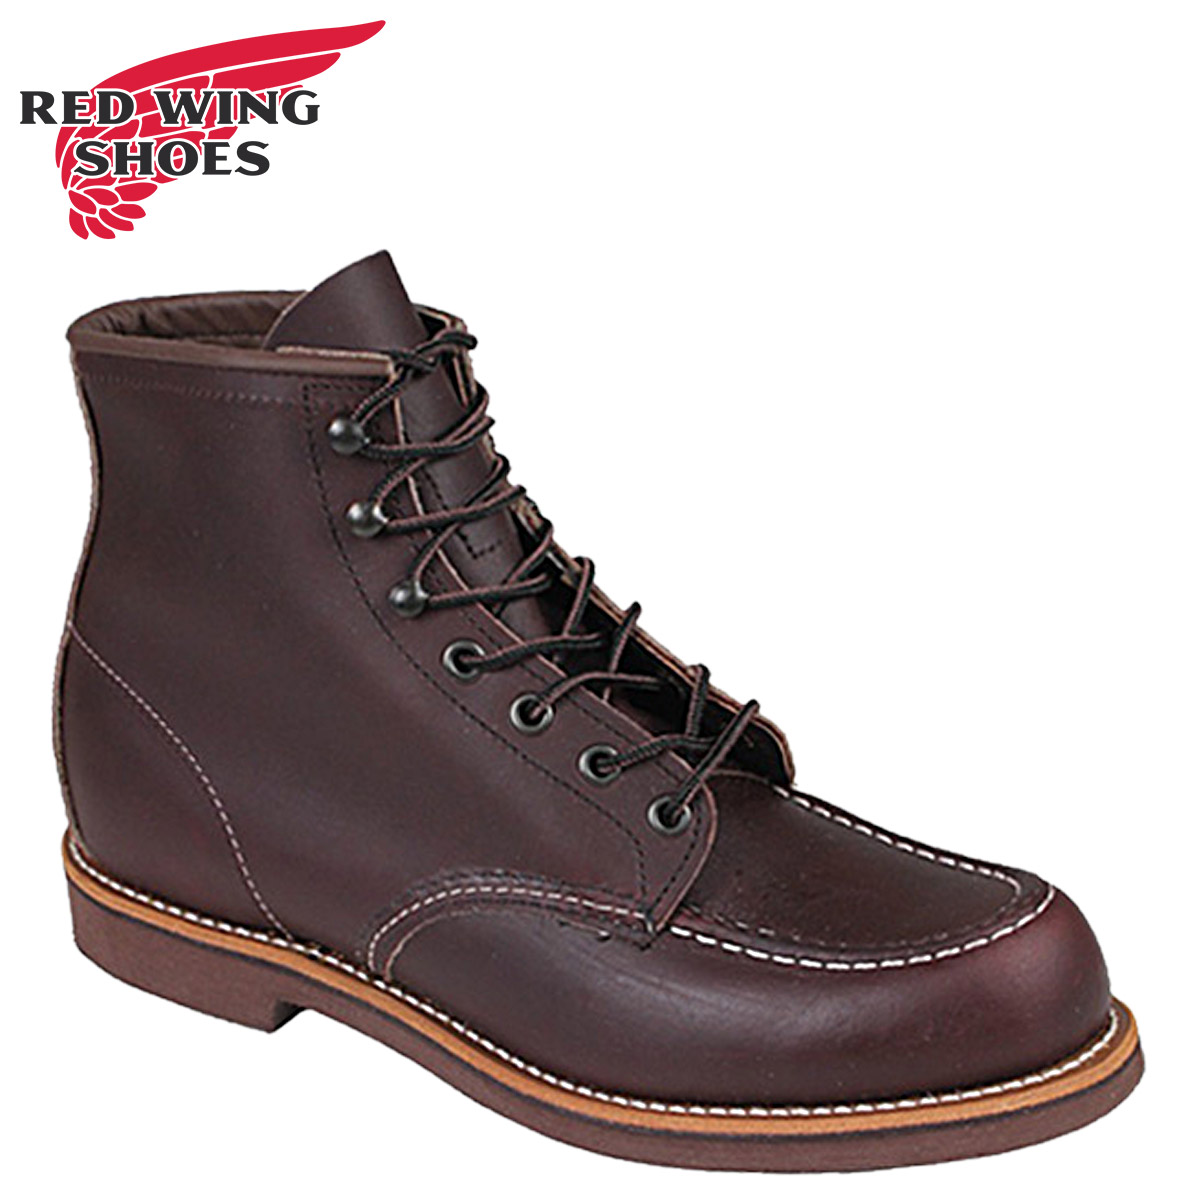 red wing boots online store